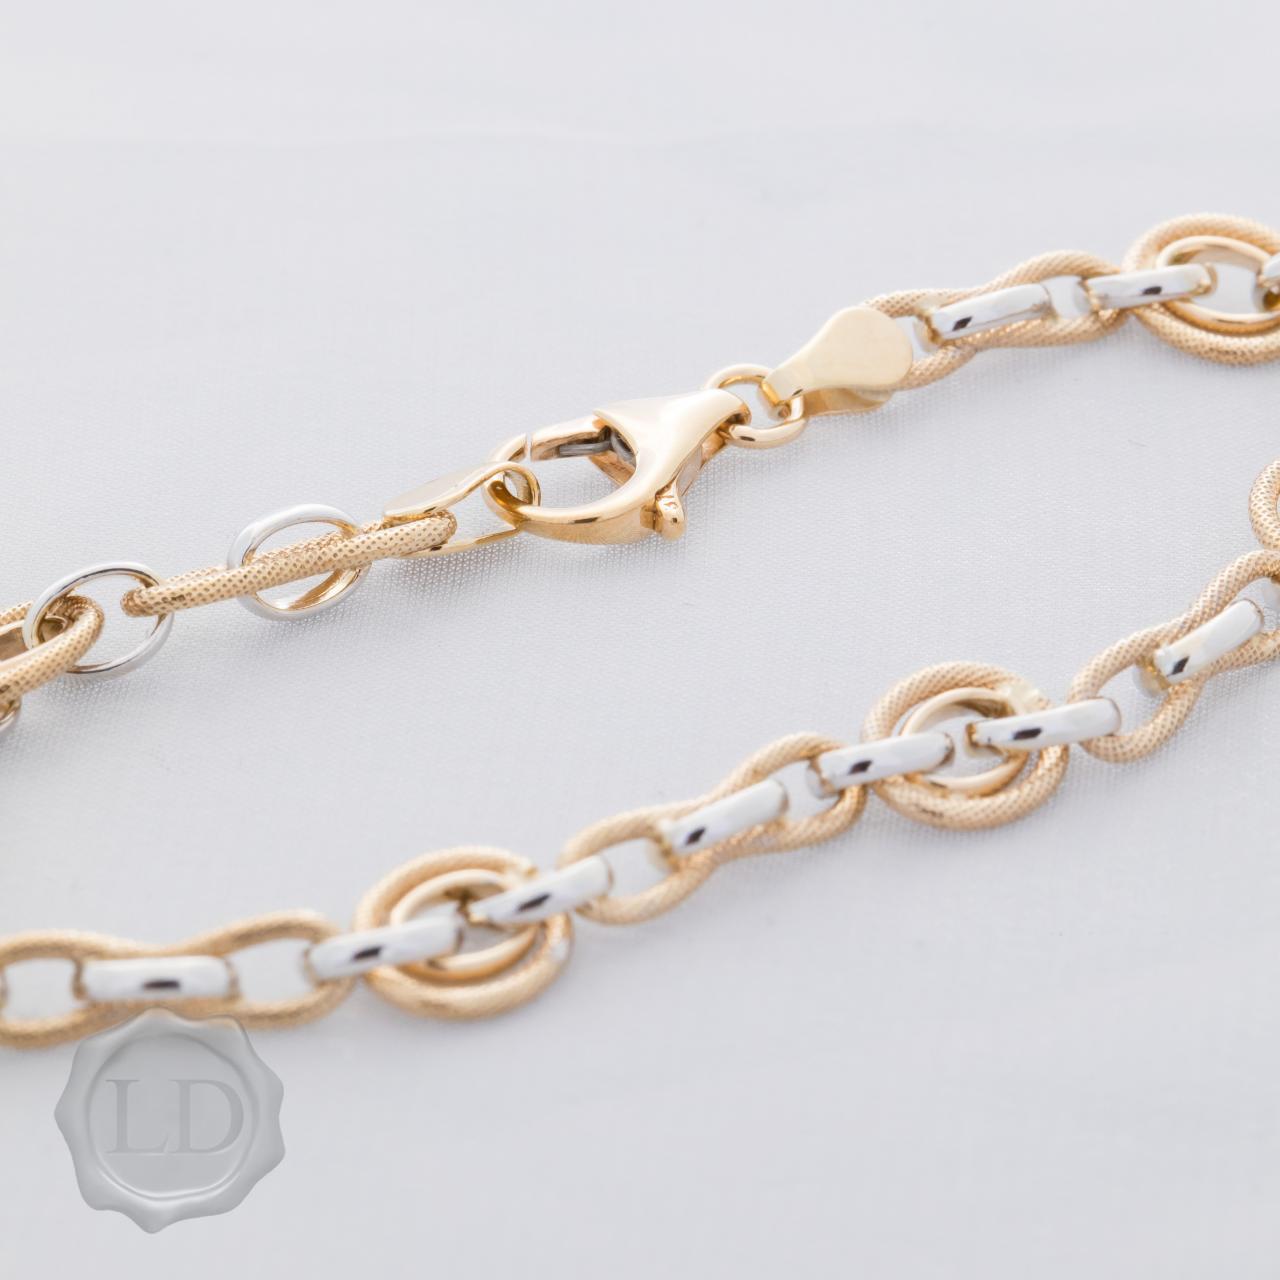 Lovely textured and polish finish bracelet in yellow and white gold two-tone